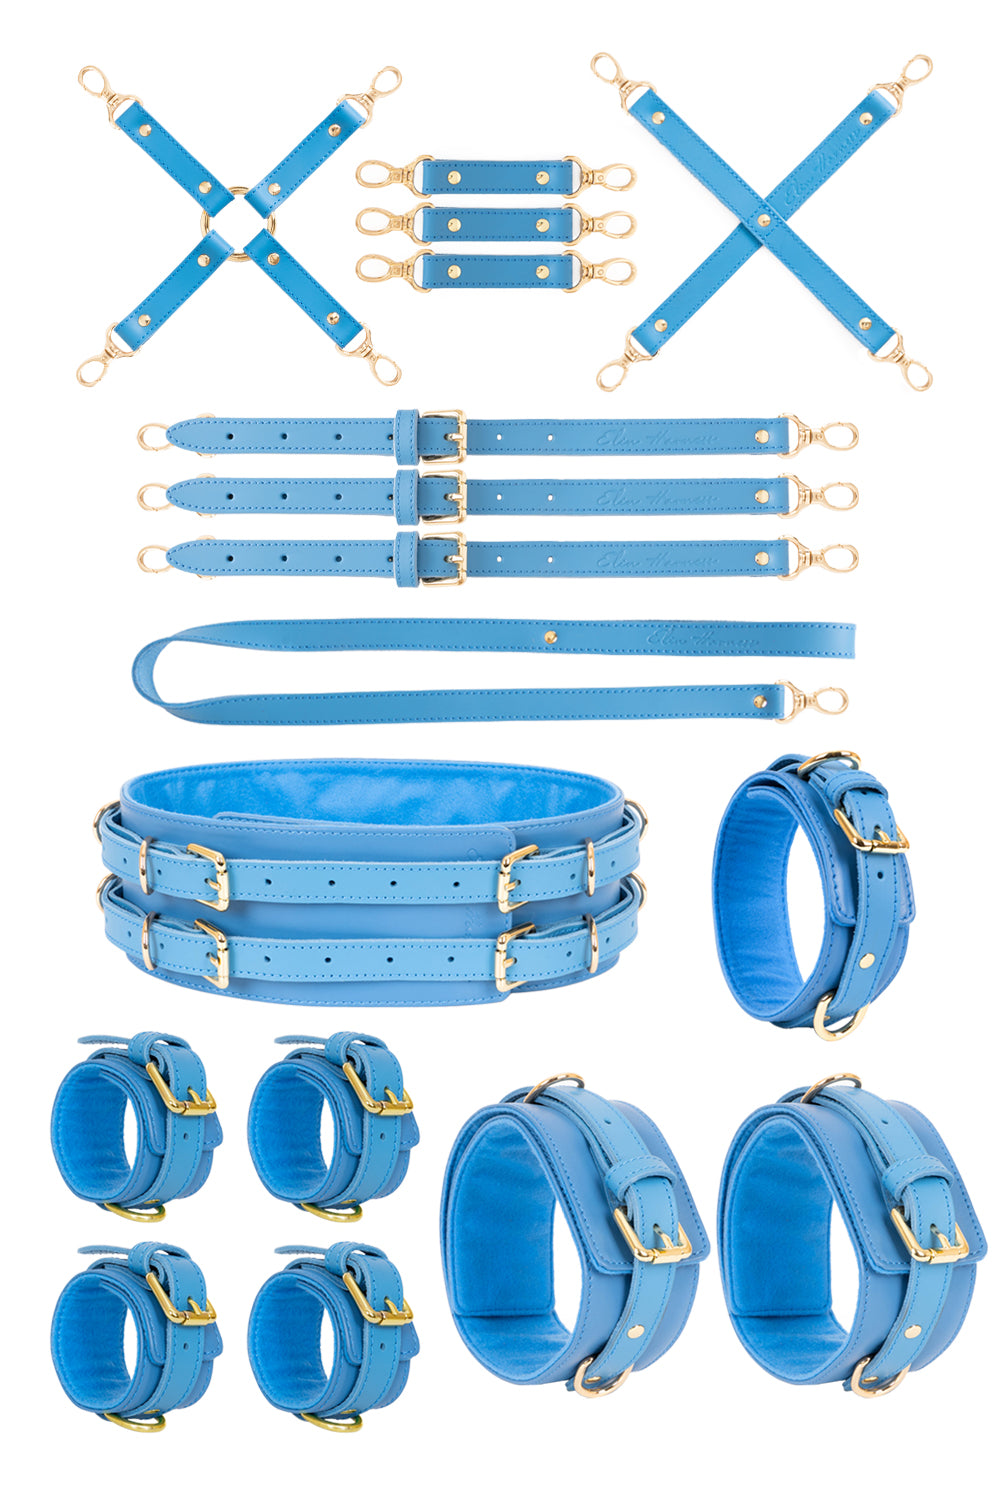 7 in 1 Leather Harness Bondage Set. 10 colors